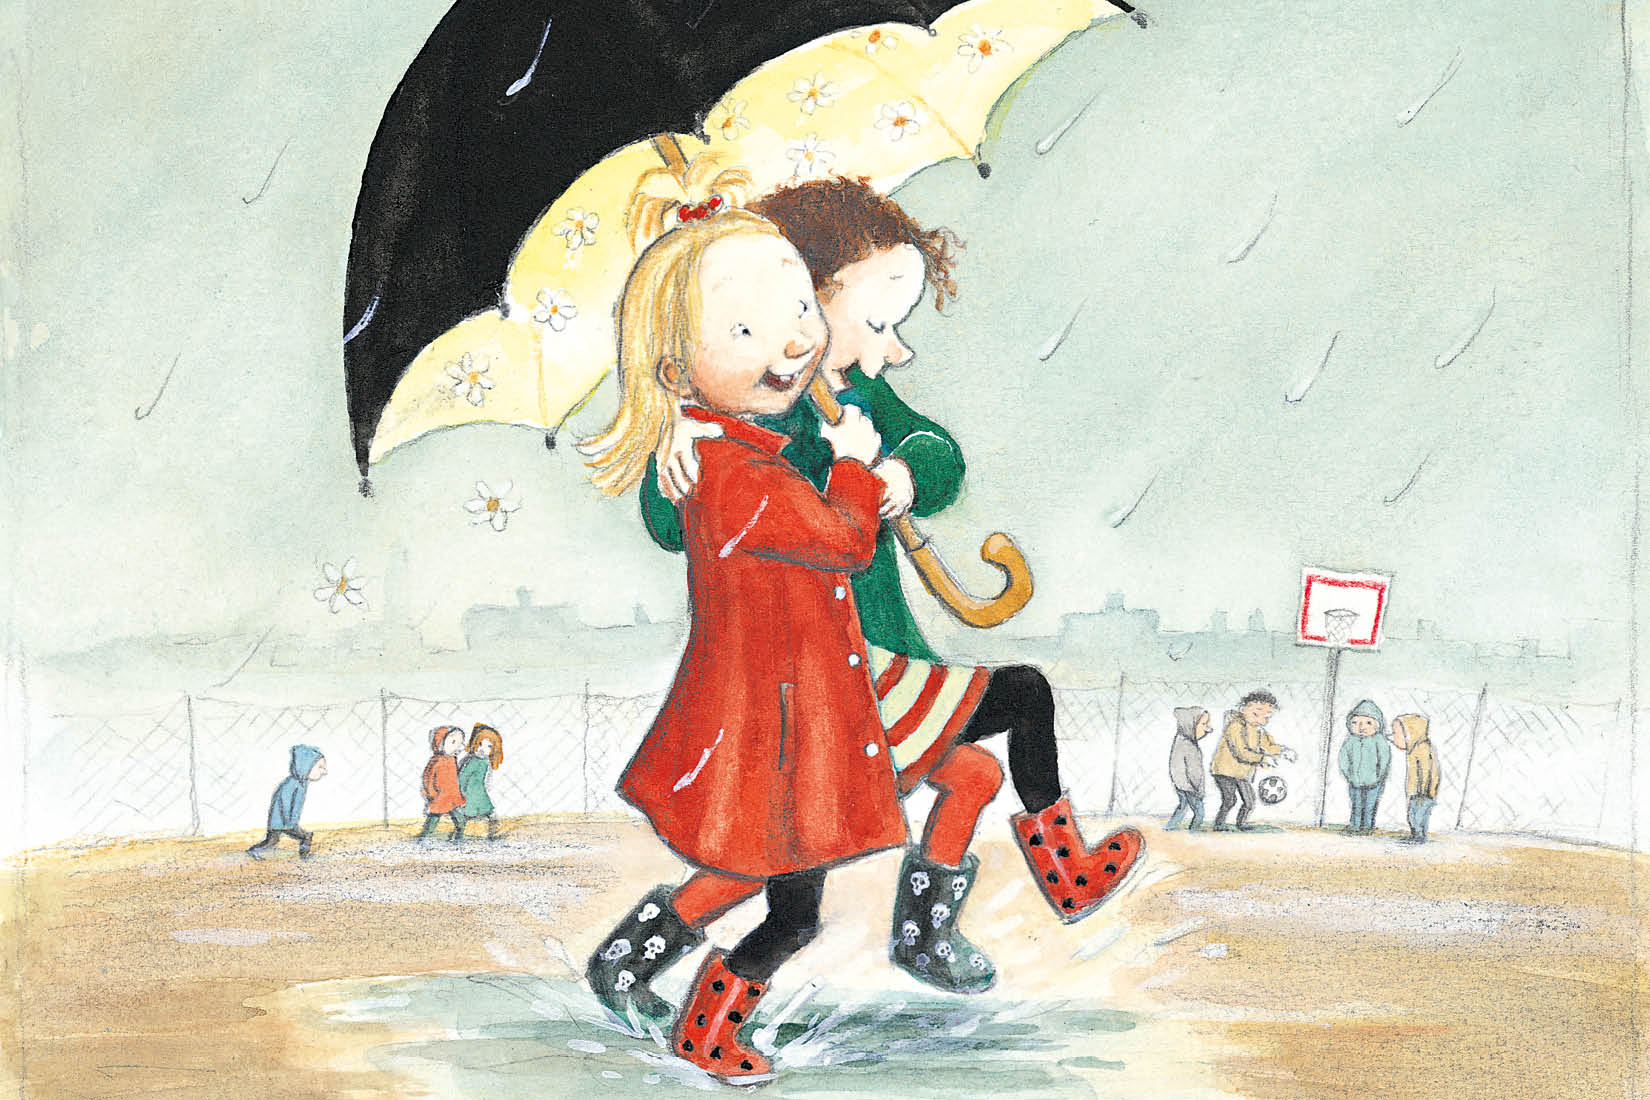 Drawing of two children jumping happily into a puddle and holding an umbrella together.